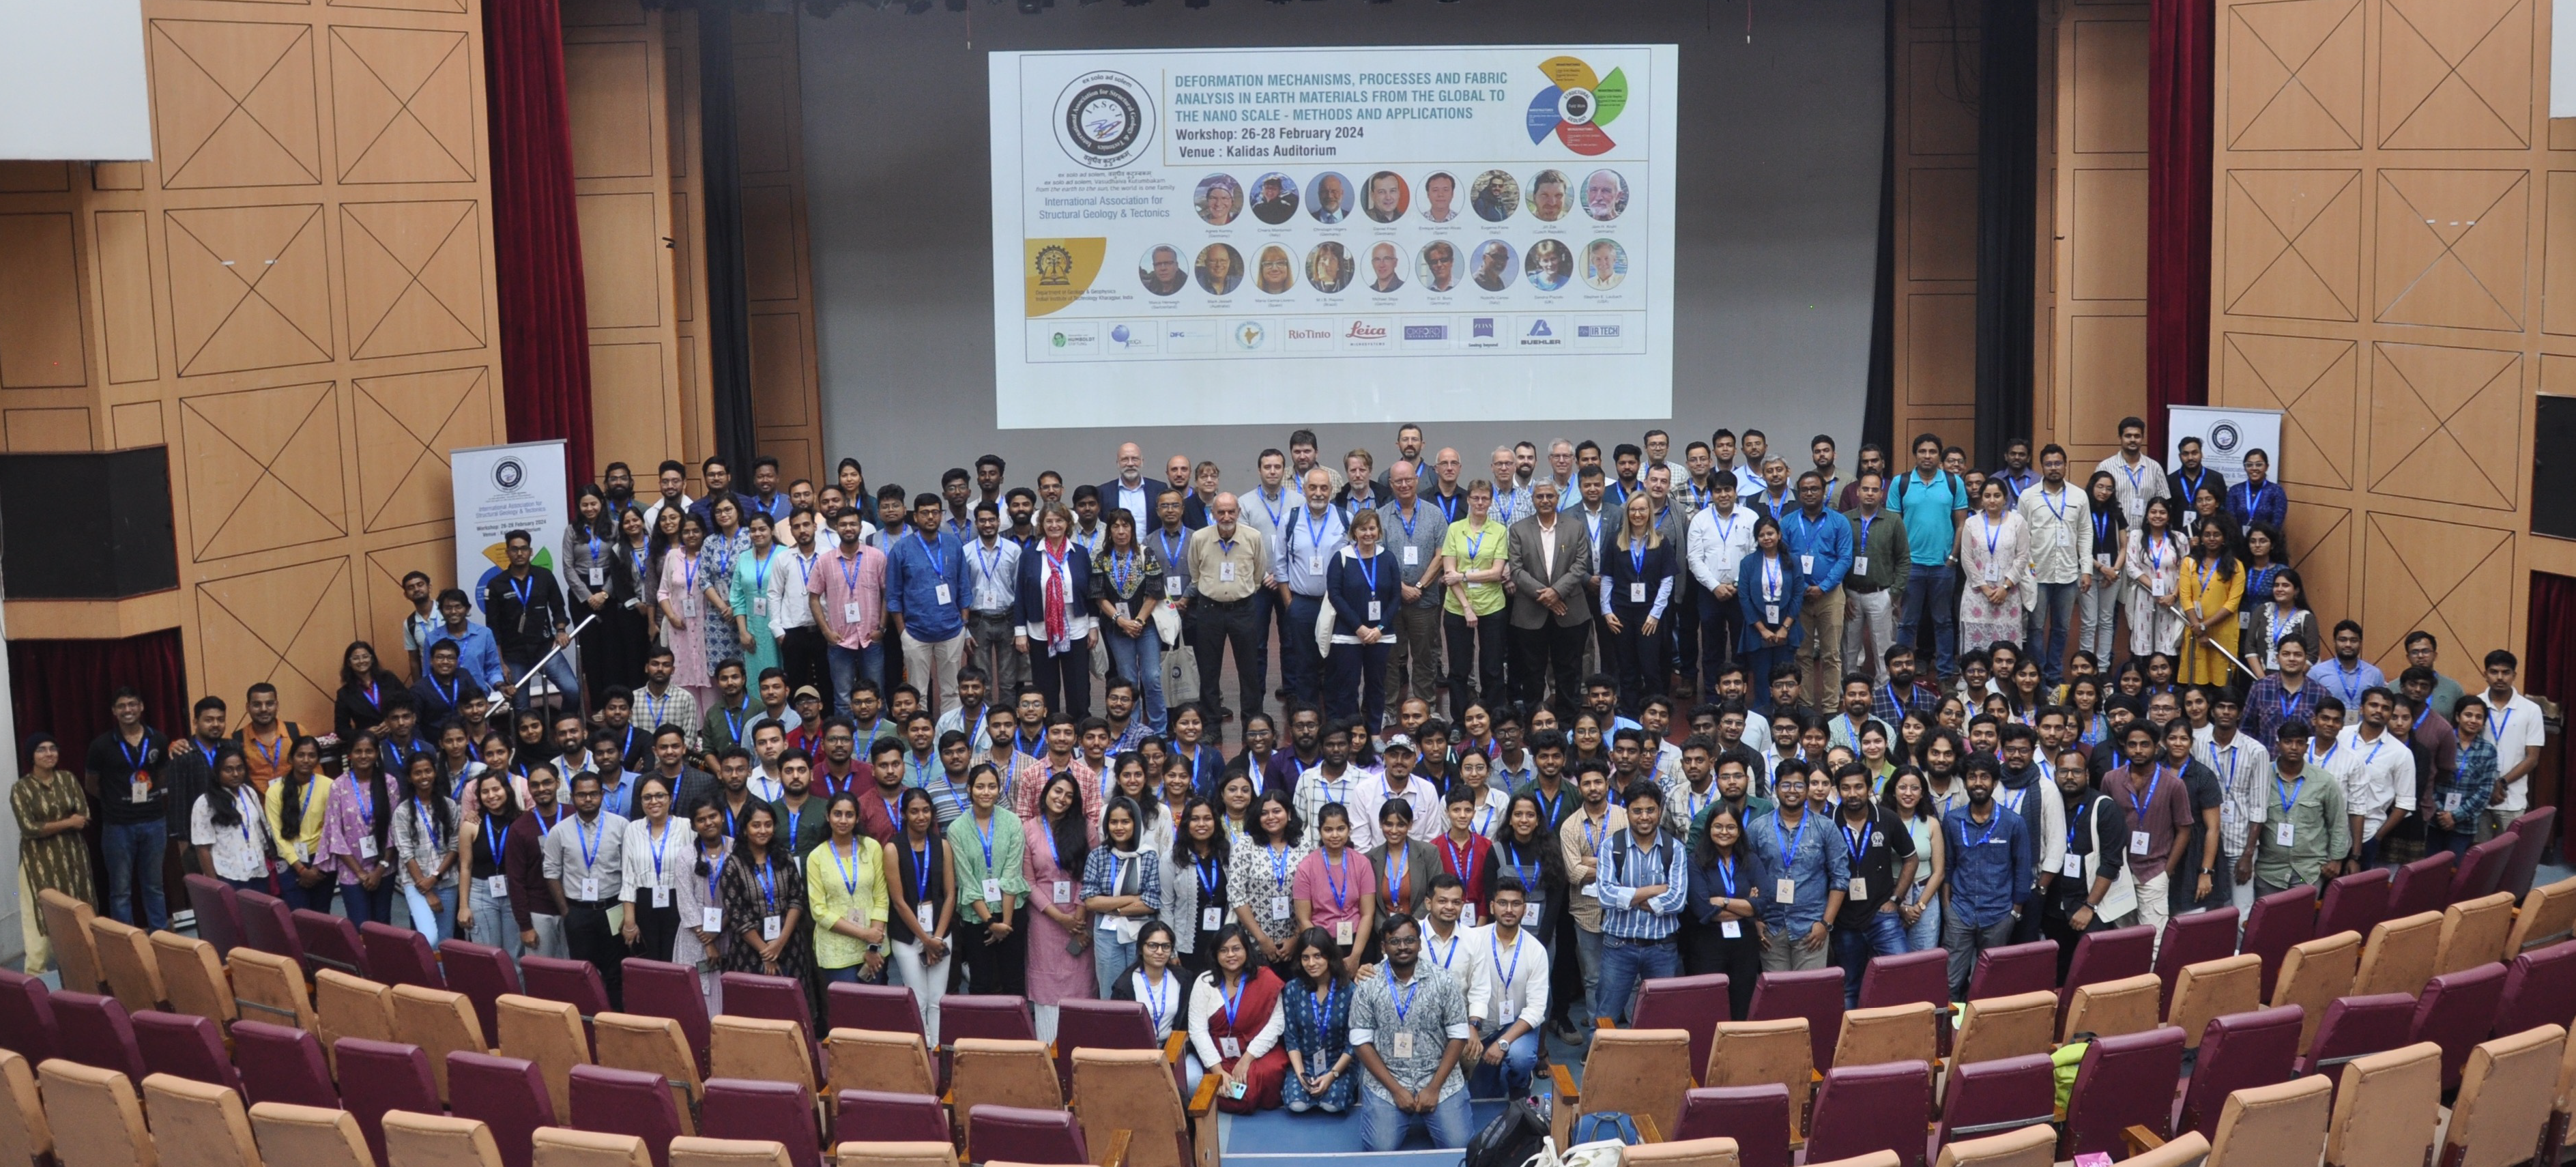 Participants of the Geoscience Workshop at IIT Kharagpur